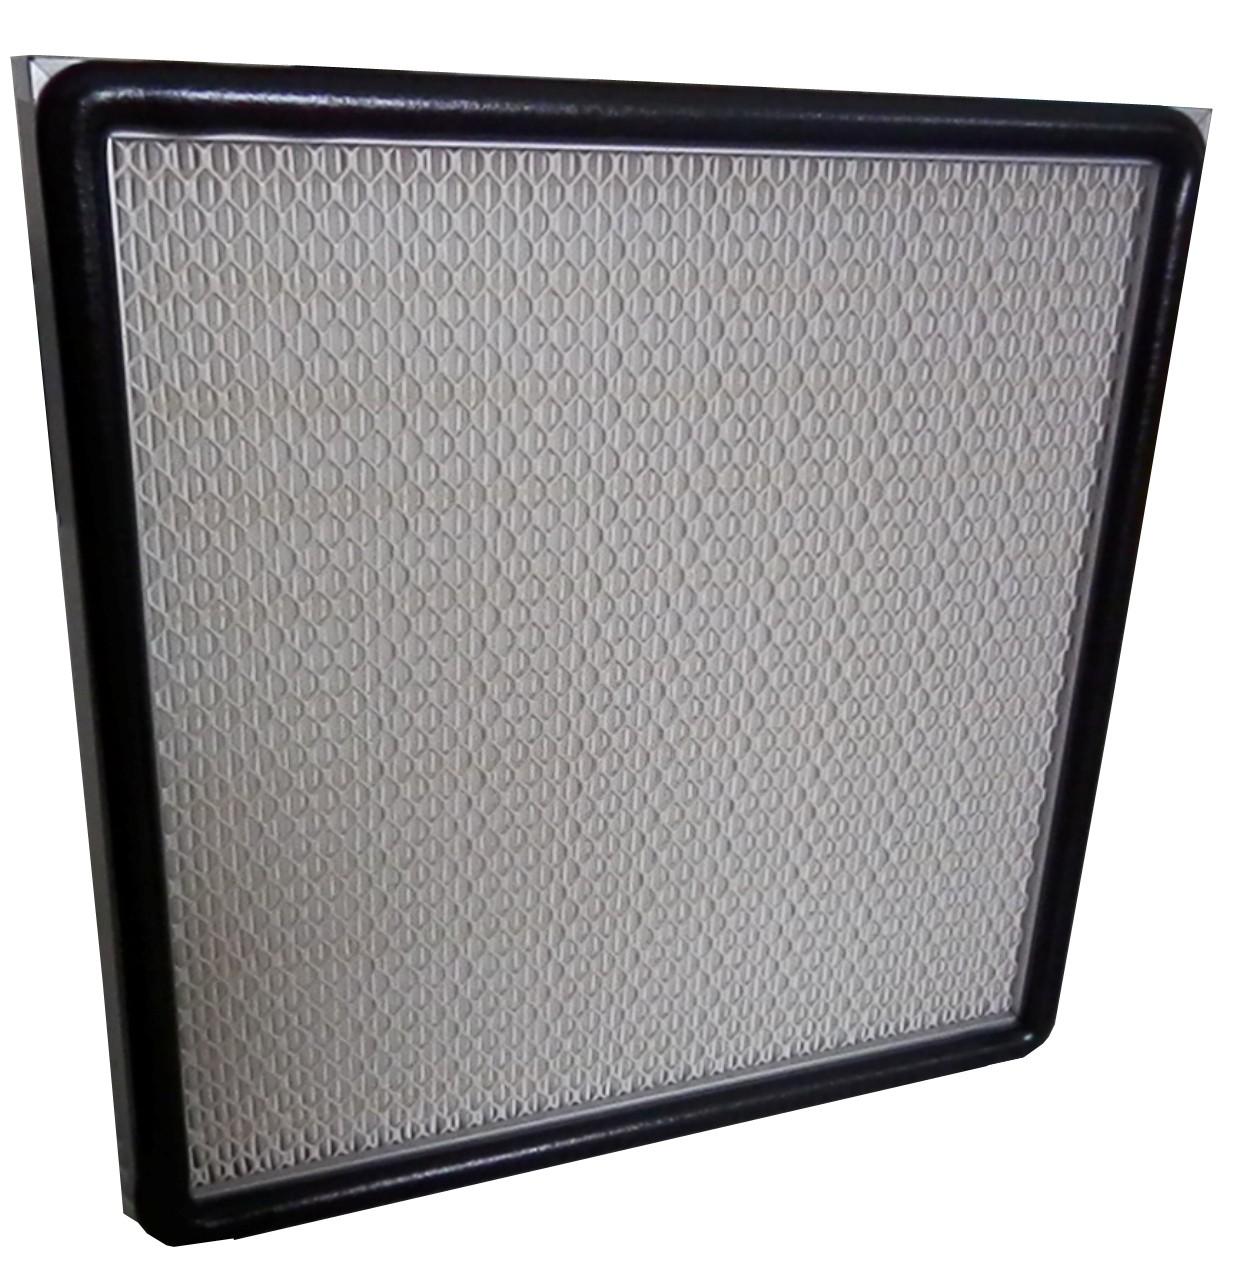 absolute ulpa air filter with big air volume for dust colletor hospital